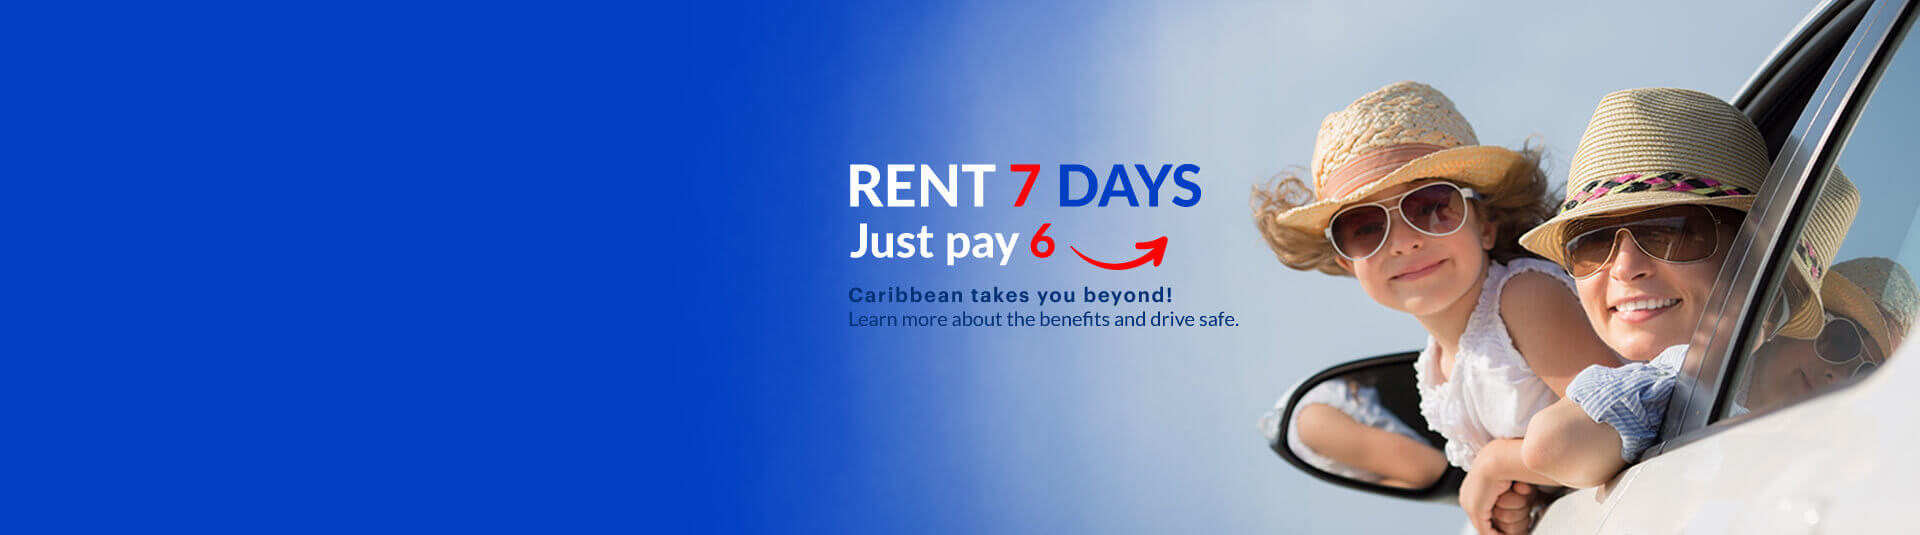 Rent for 7 days and only pay 6